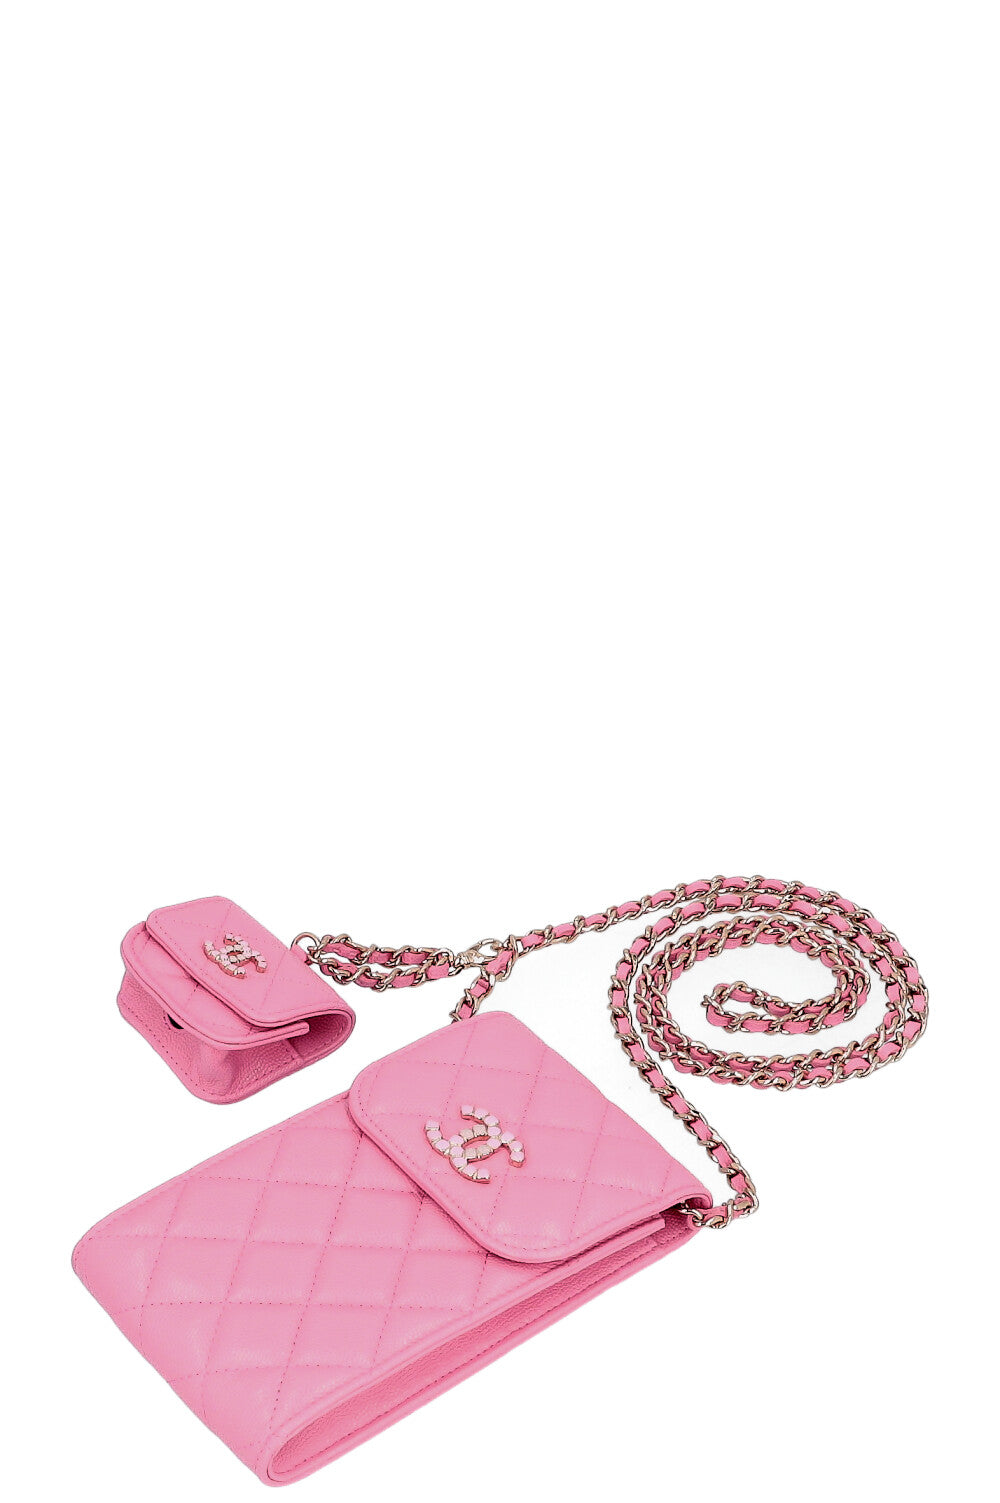 CHANEL Phone &amp; Airpods Case